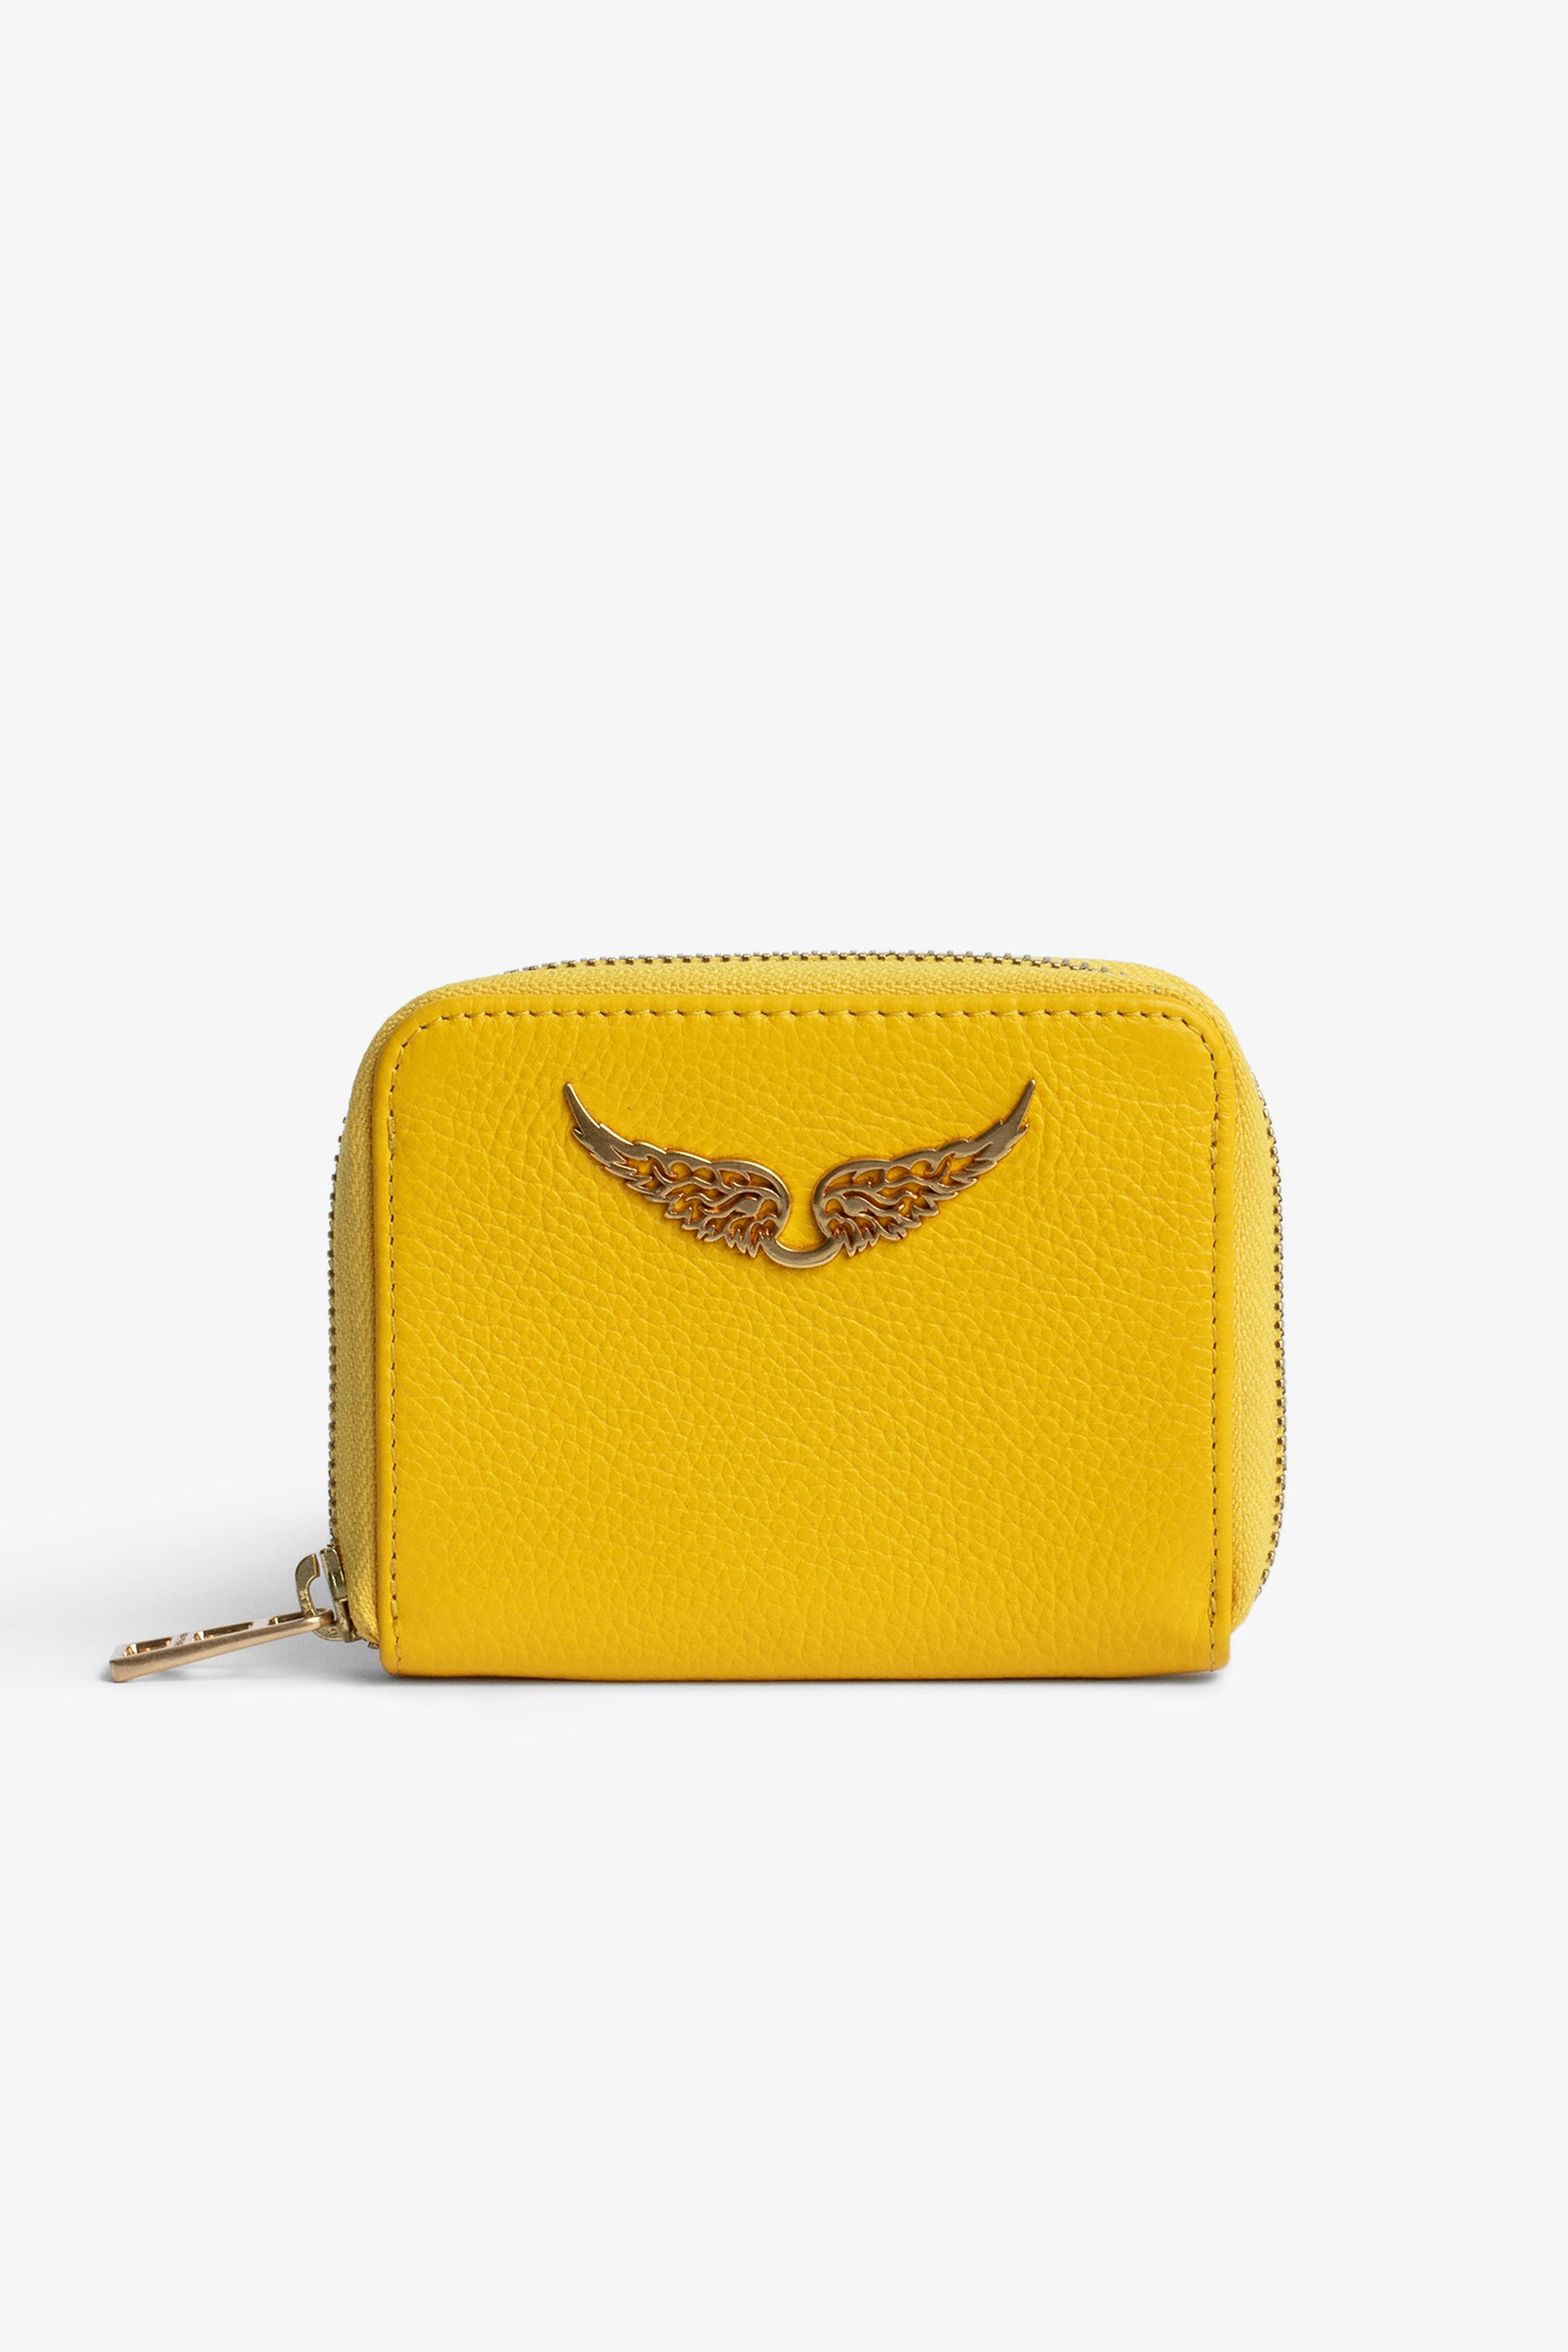 Mini ZV Coin Purse Women’s coin purse in yellow grained leather